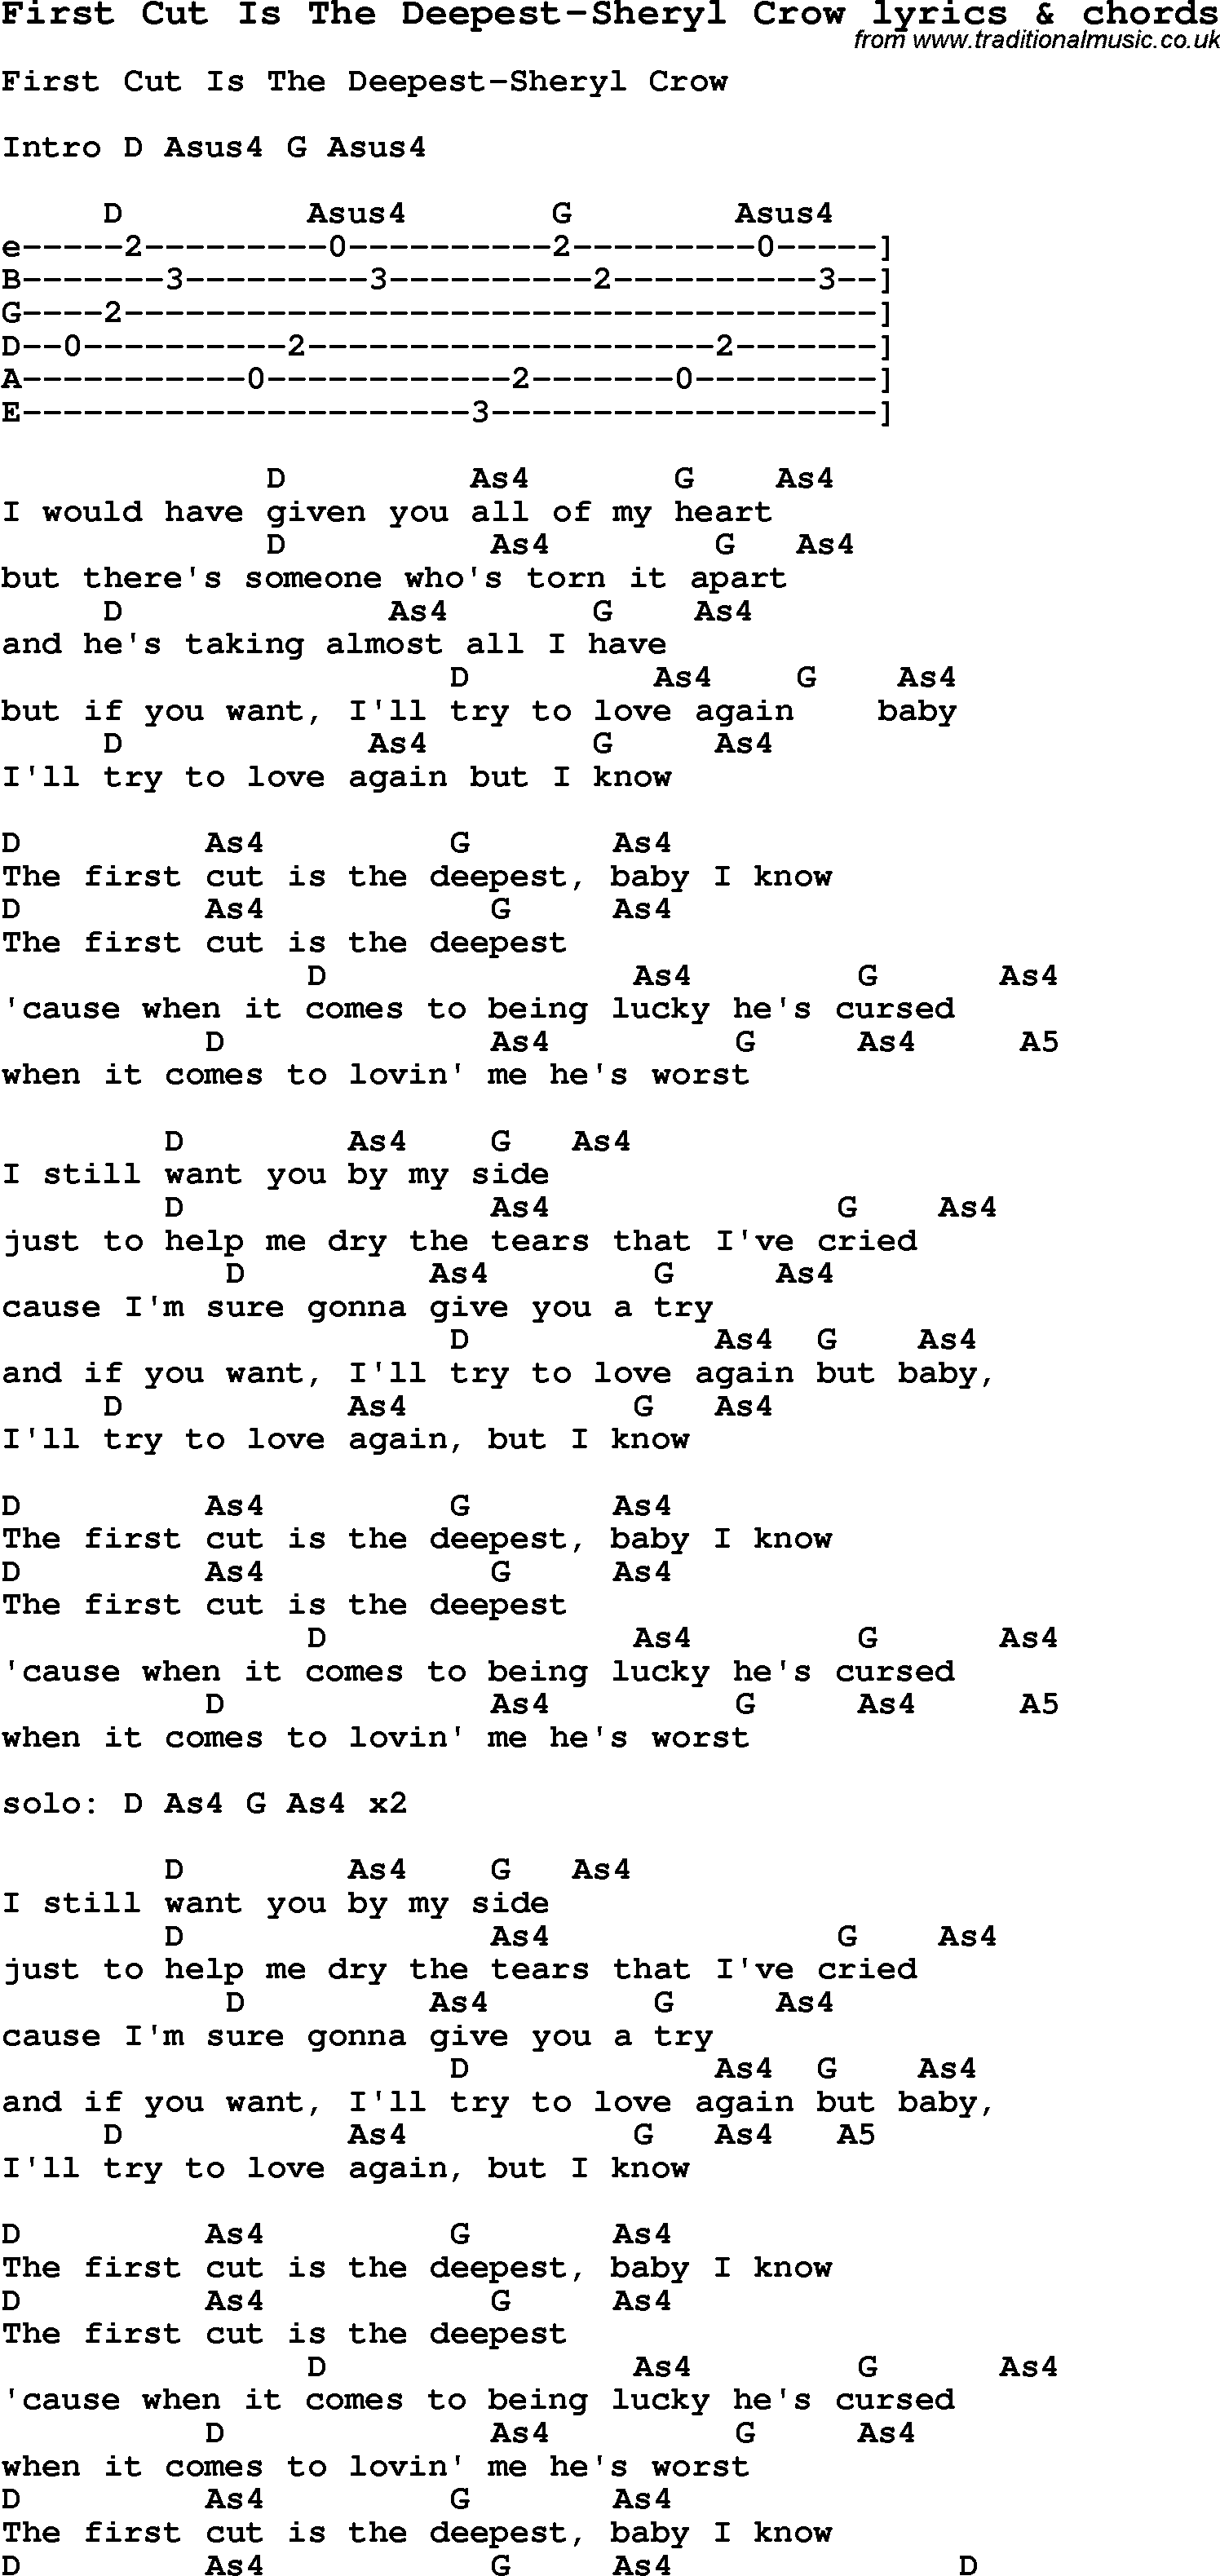 Love Song Lyrics For First Cut Is The Deepest Sheryl Crow With Chords